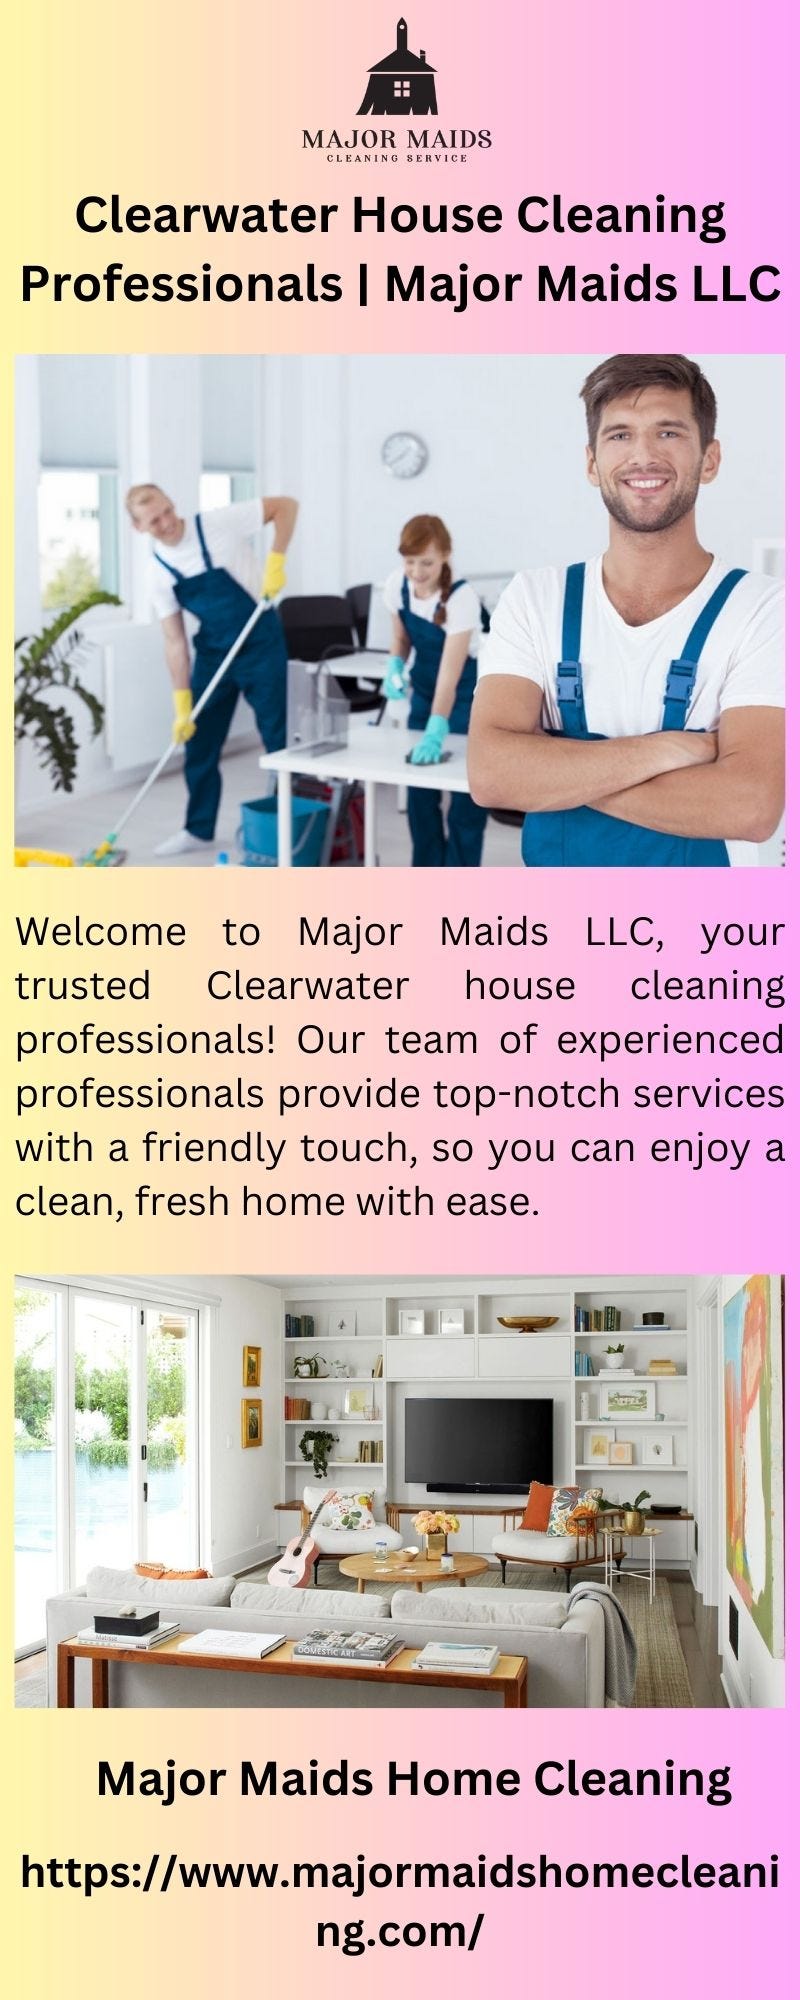 Clearwater House Cleaning Professionals | Major Maids LLC - majormaidshome  cleaning - Medium